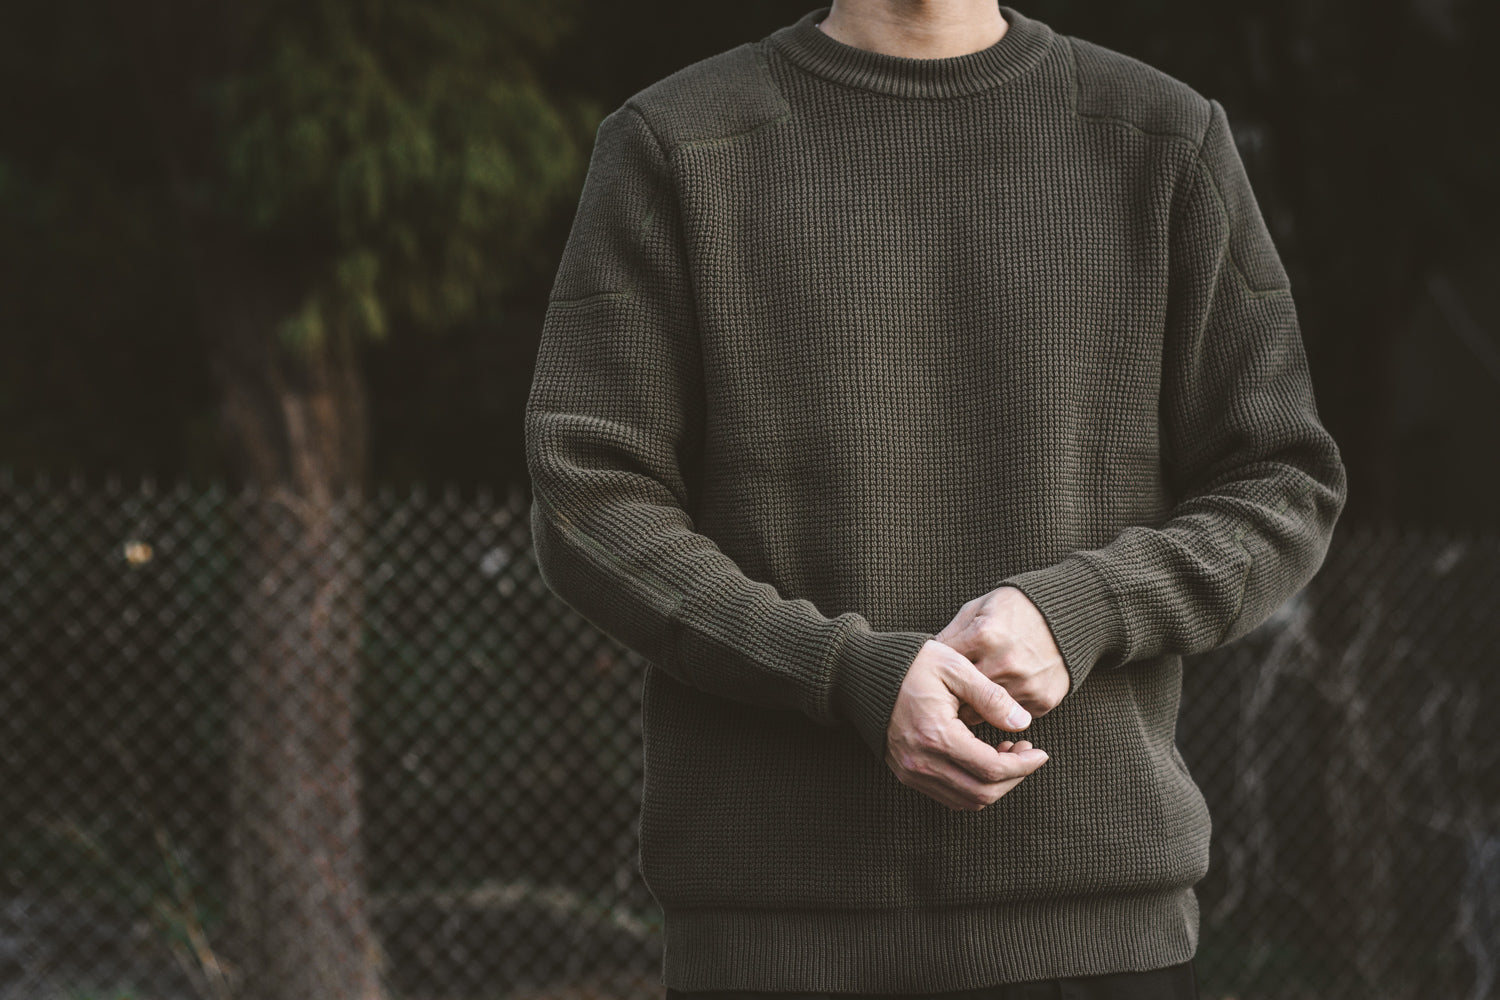 ACV-KN01 PADDED WAFFLE COTTON KNIT - ARMY GREEN - May club